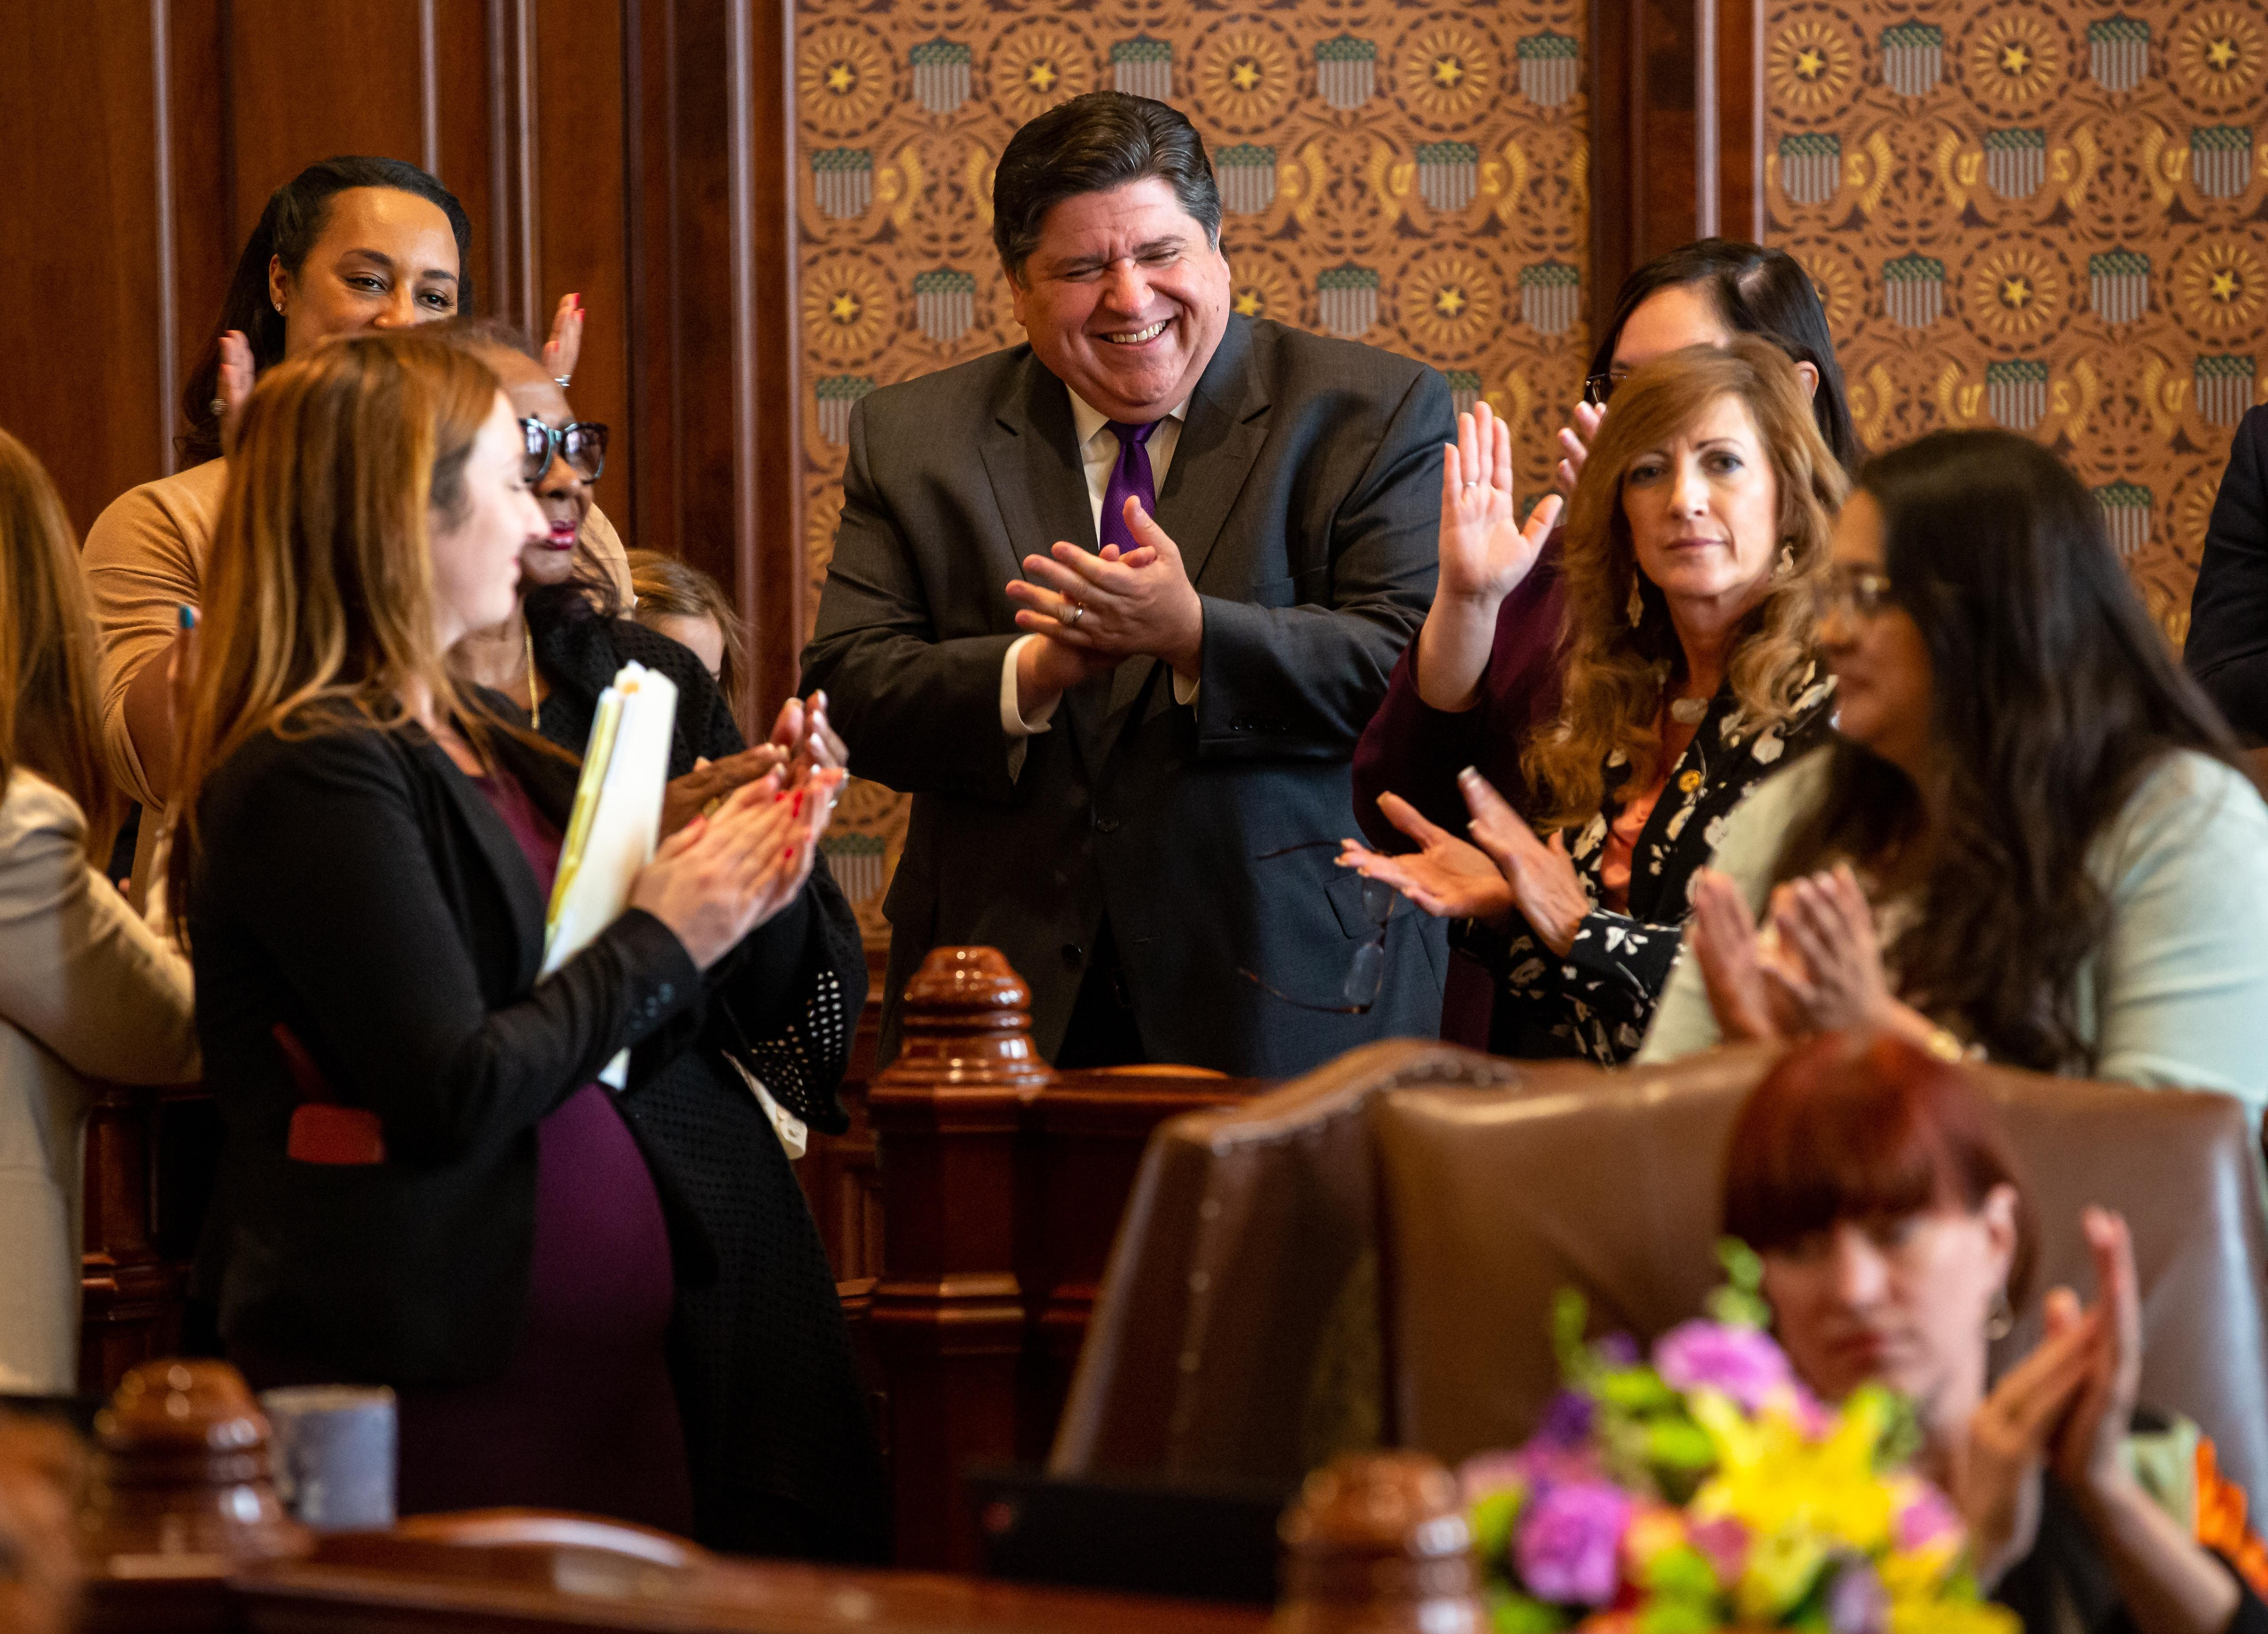 A look back at the 'historic' spring session of the Illinois General Assembly